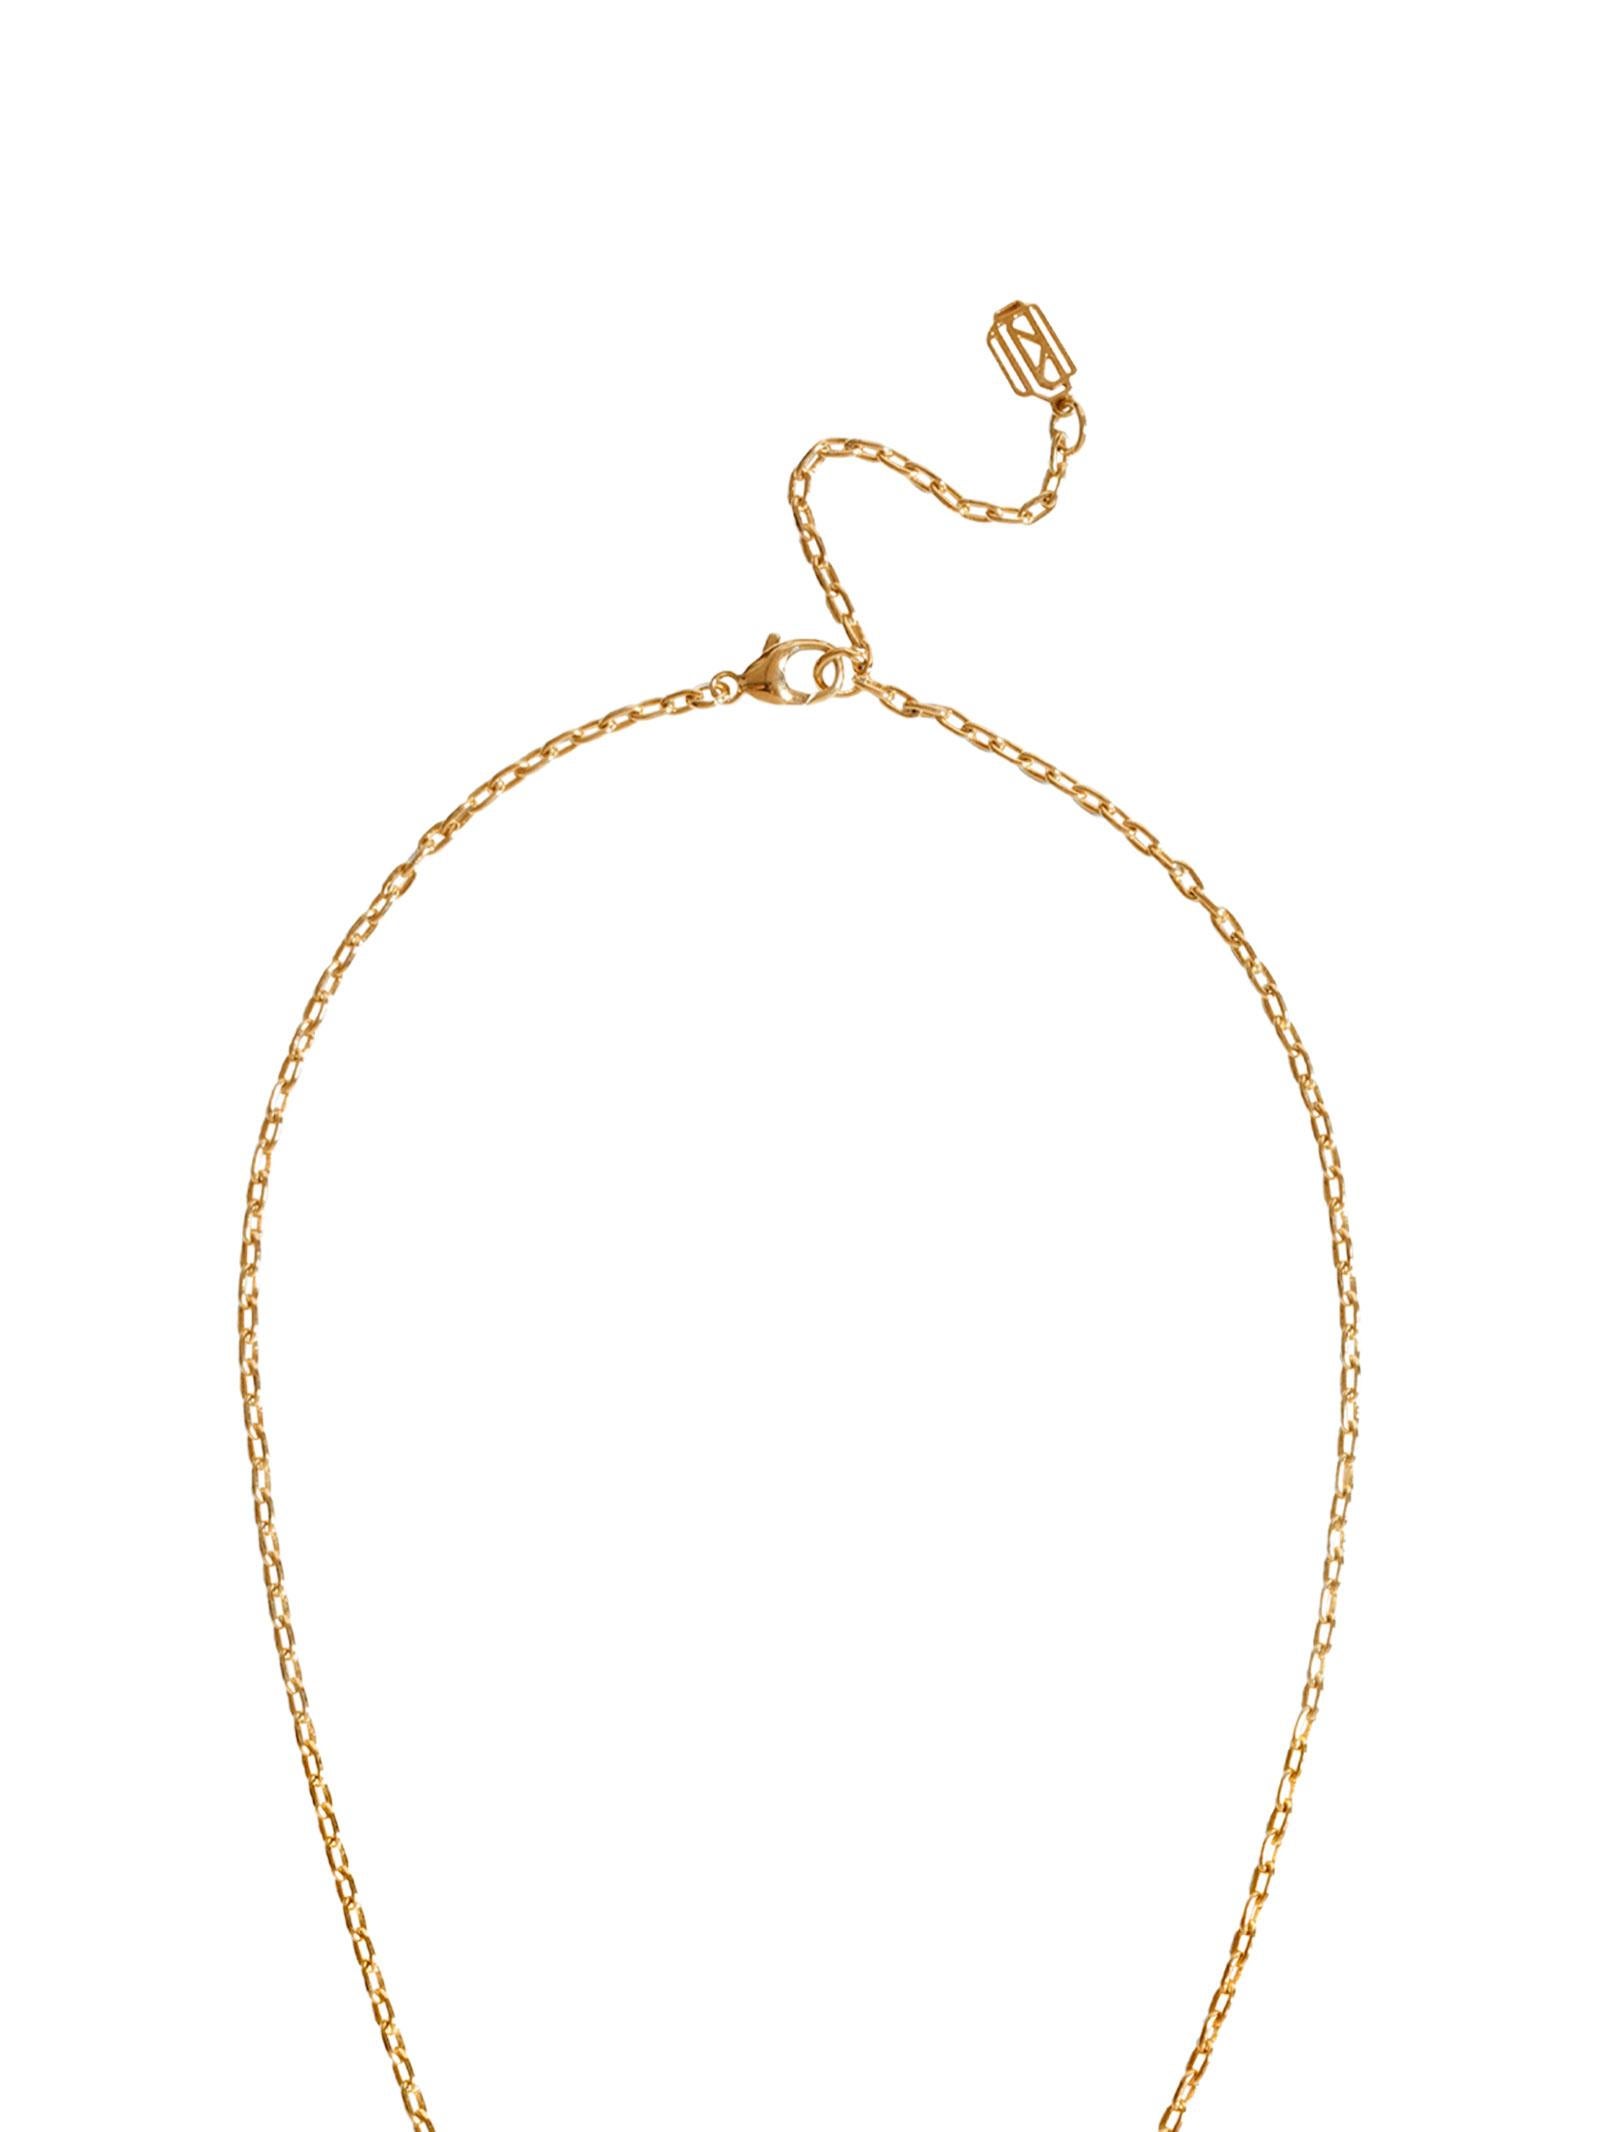 Amanti Chain-Linked Necklace with two hexagon pendant hand-crafted in 18-karat yellow gold
By Angie Marei 

DETAILS
The Amanti Lariat Chain Necklace by Angie Marei features a long 18-karat yellow gold chain with Gothic-era style hexagonal pendants -